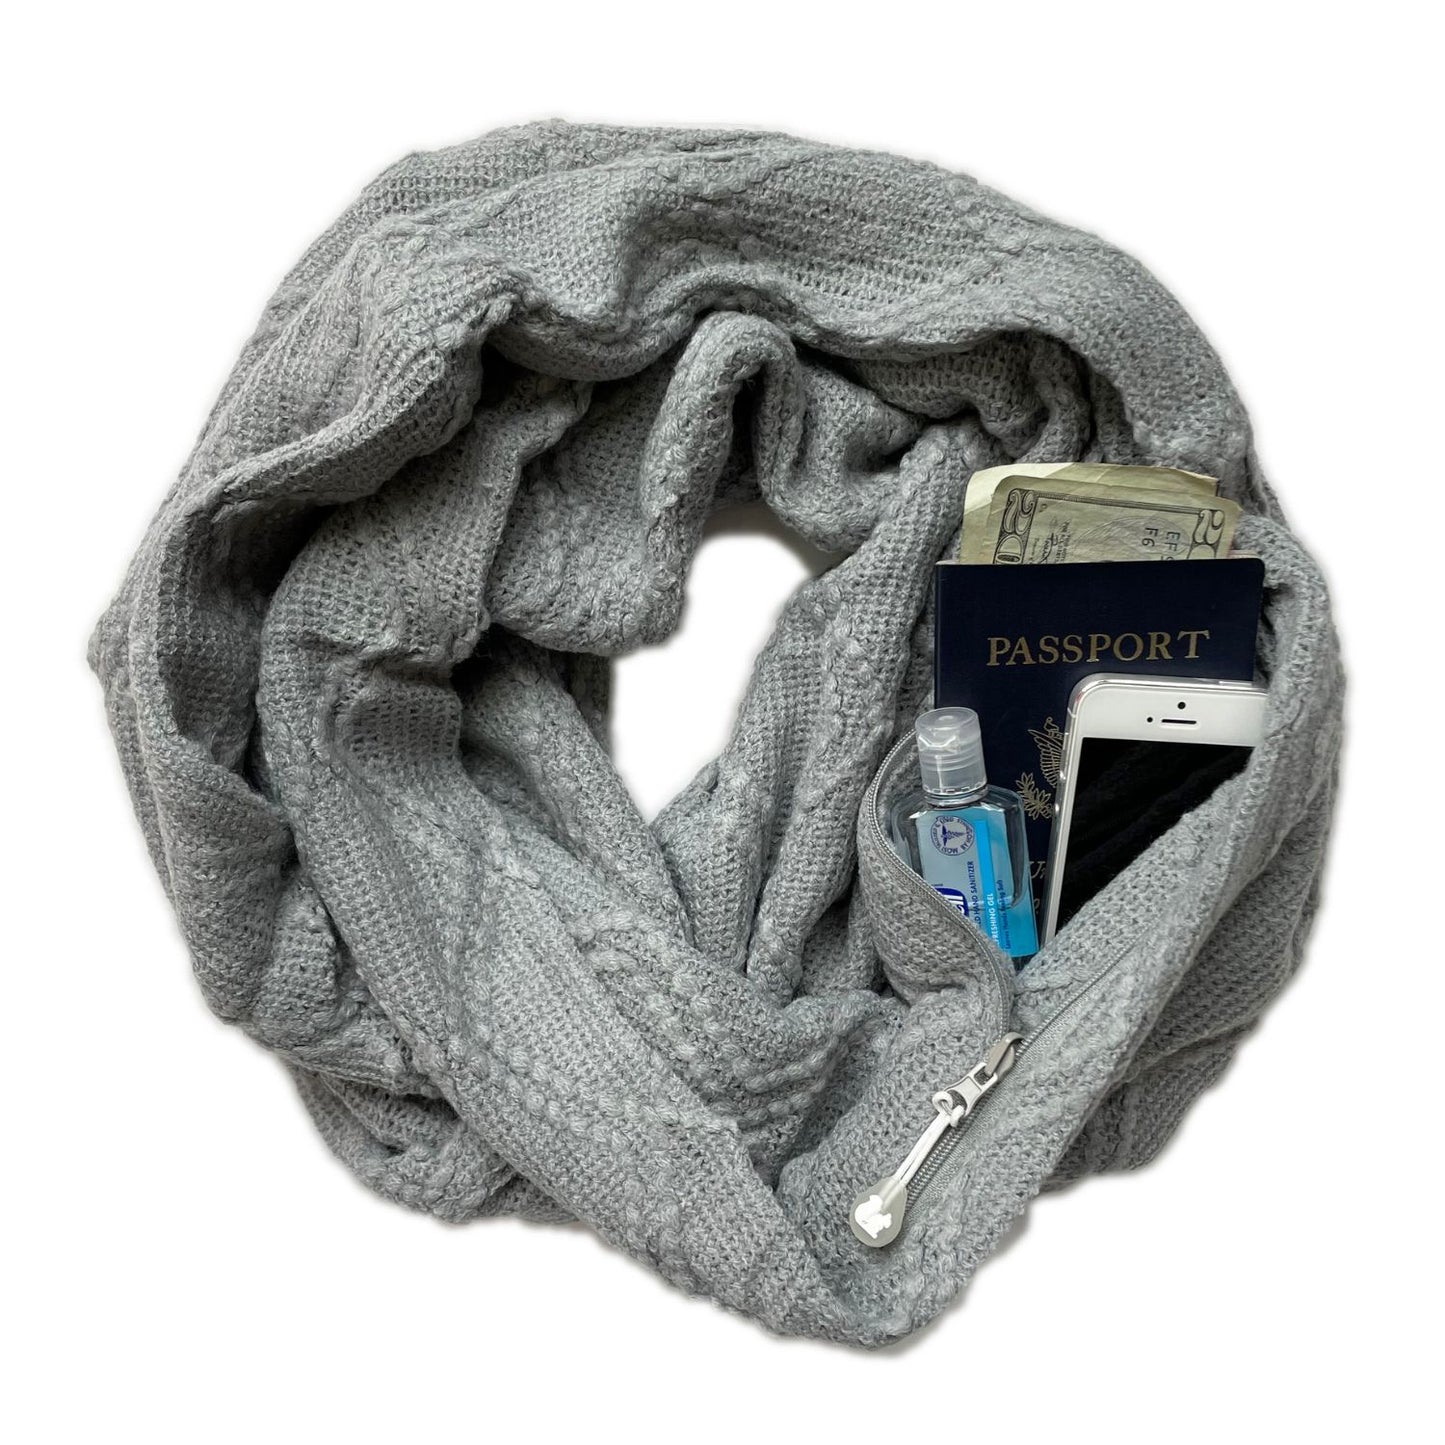 SHOLDIT® Convertible Infinity Scarf with Pocket Nordic Grey with items in pocket